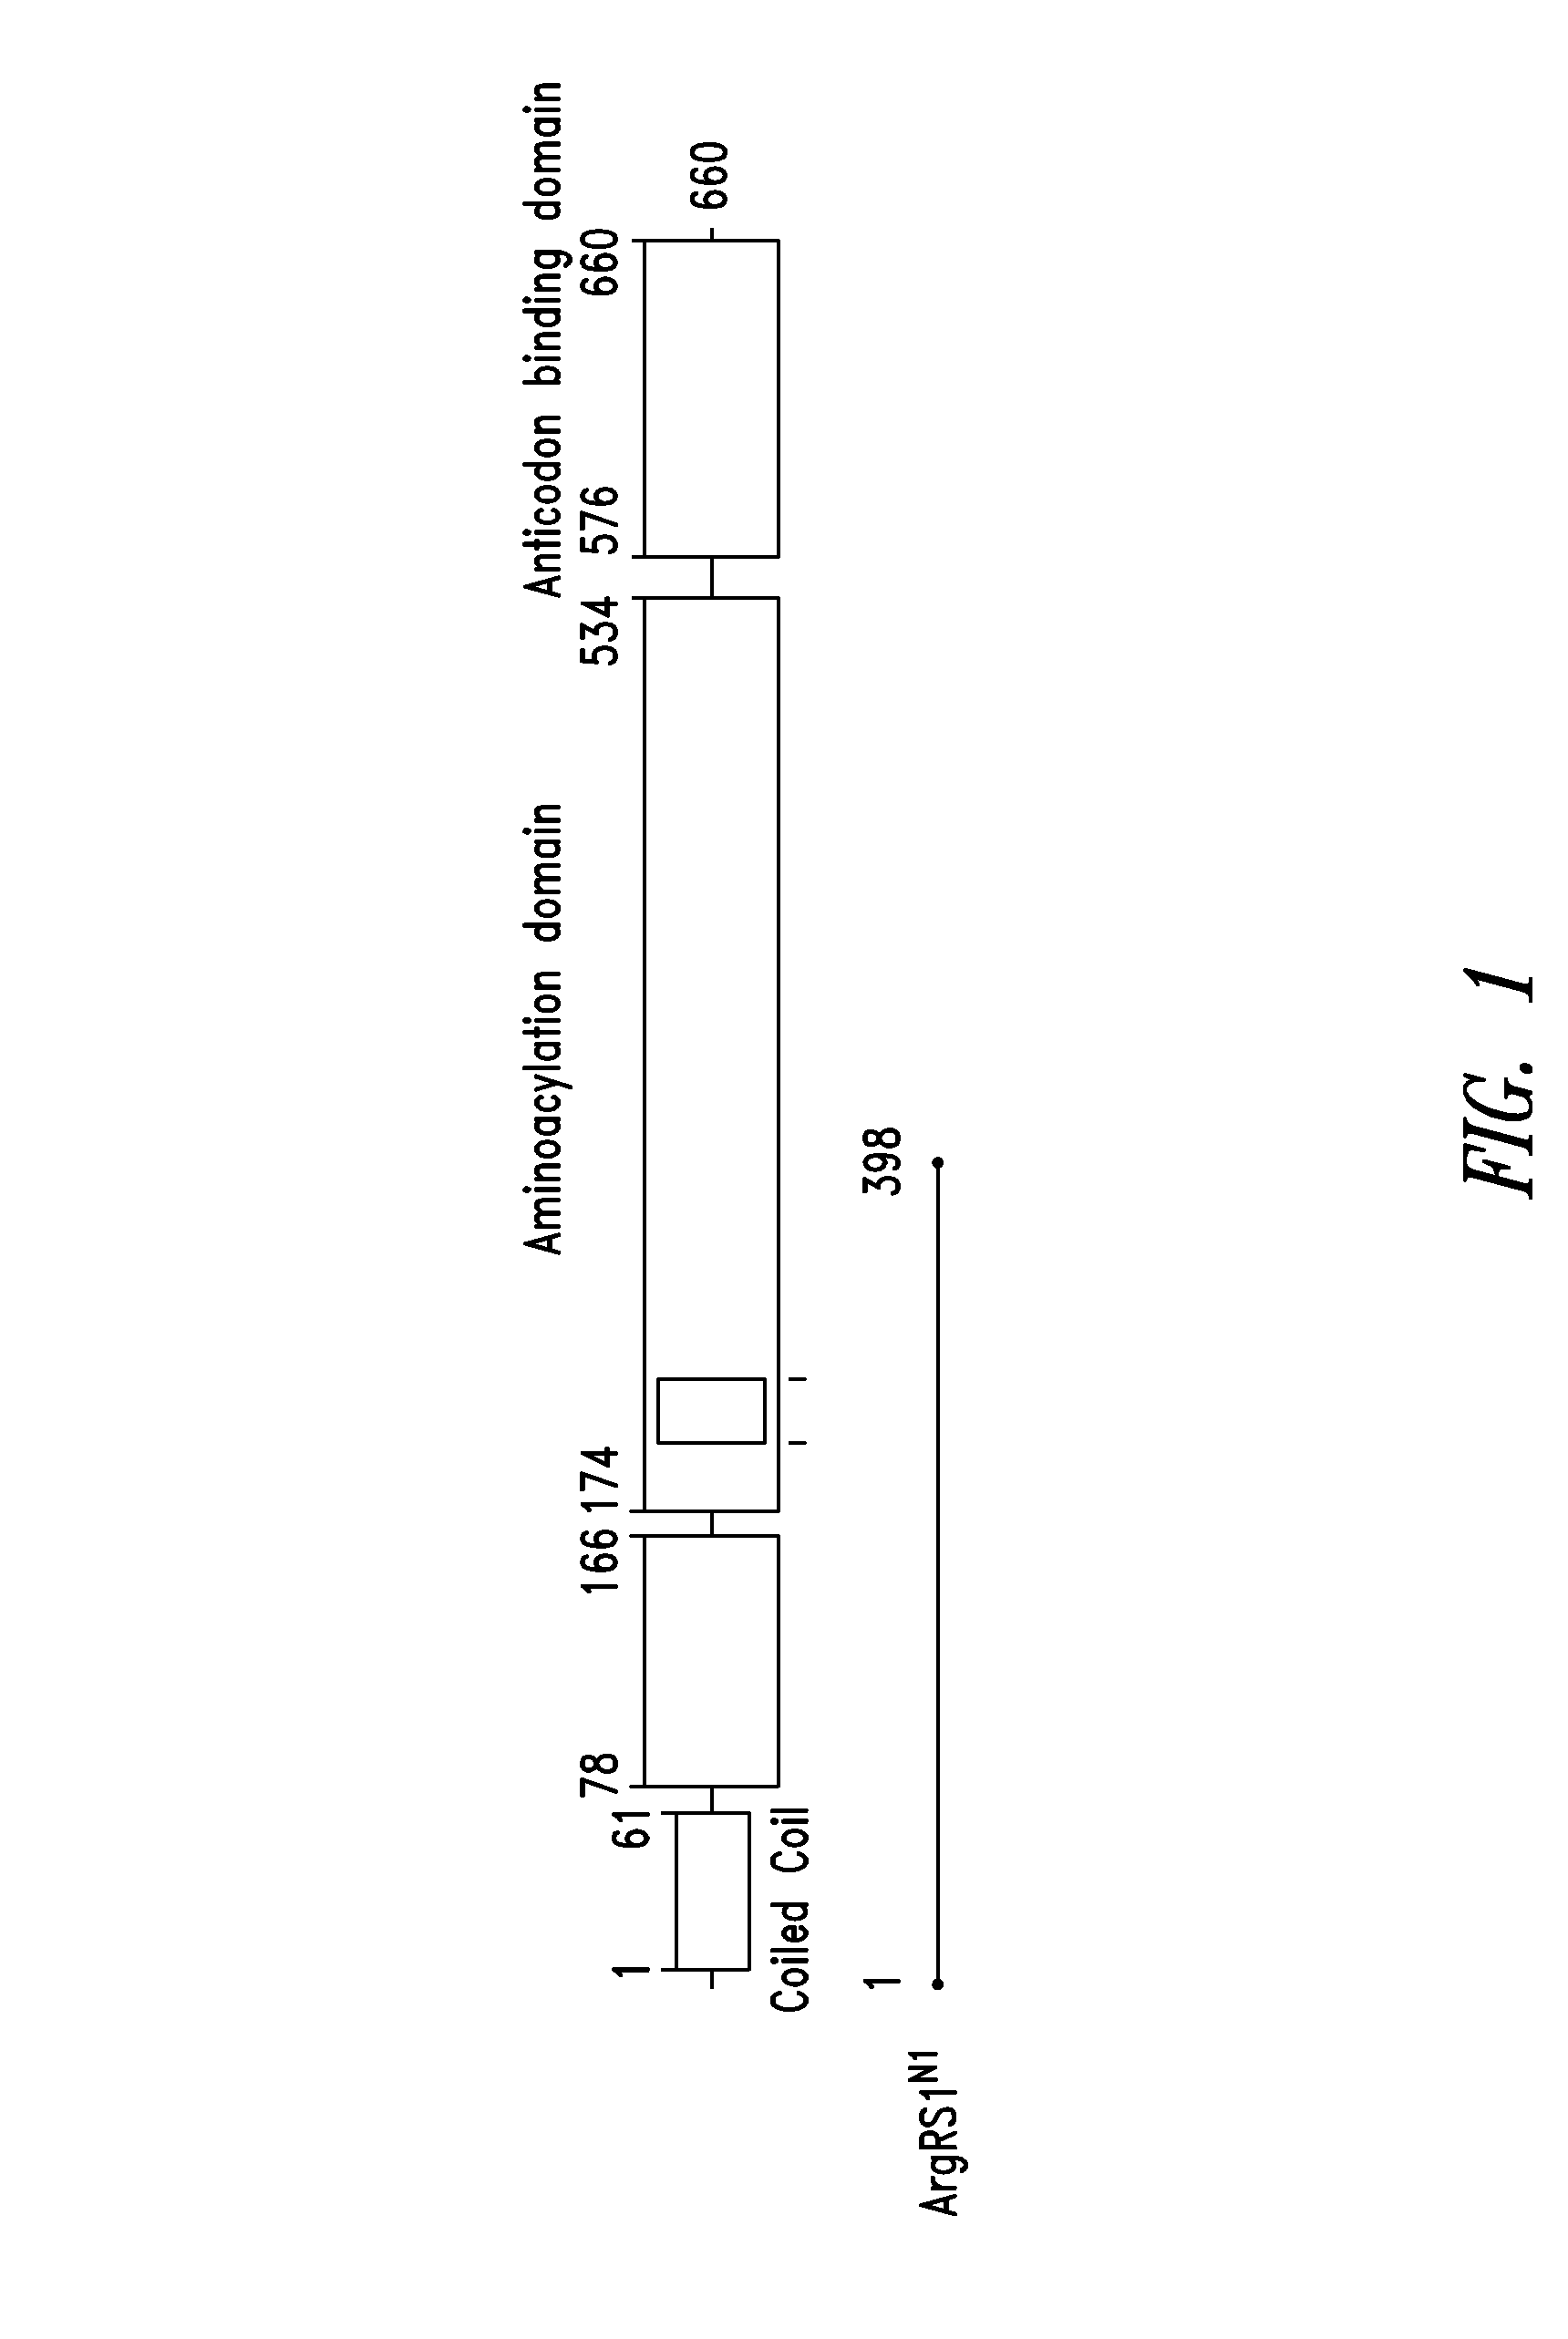 Innovative discovery of therapeutic, diagnostic, and antibody compositions related protein fragments of arginyl-trna synthetases